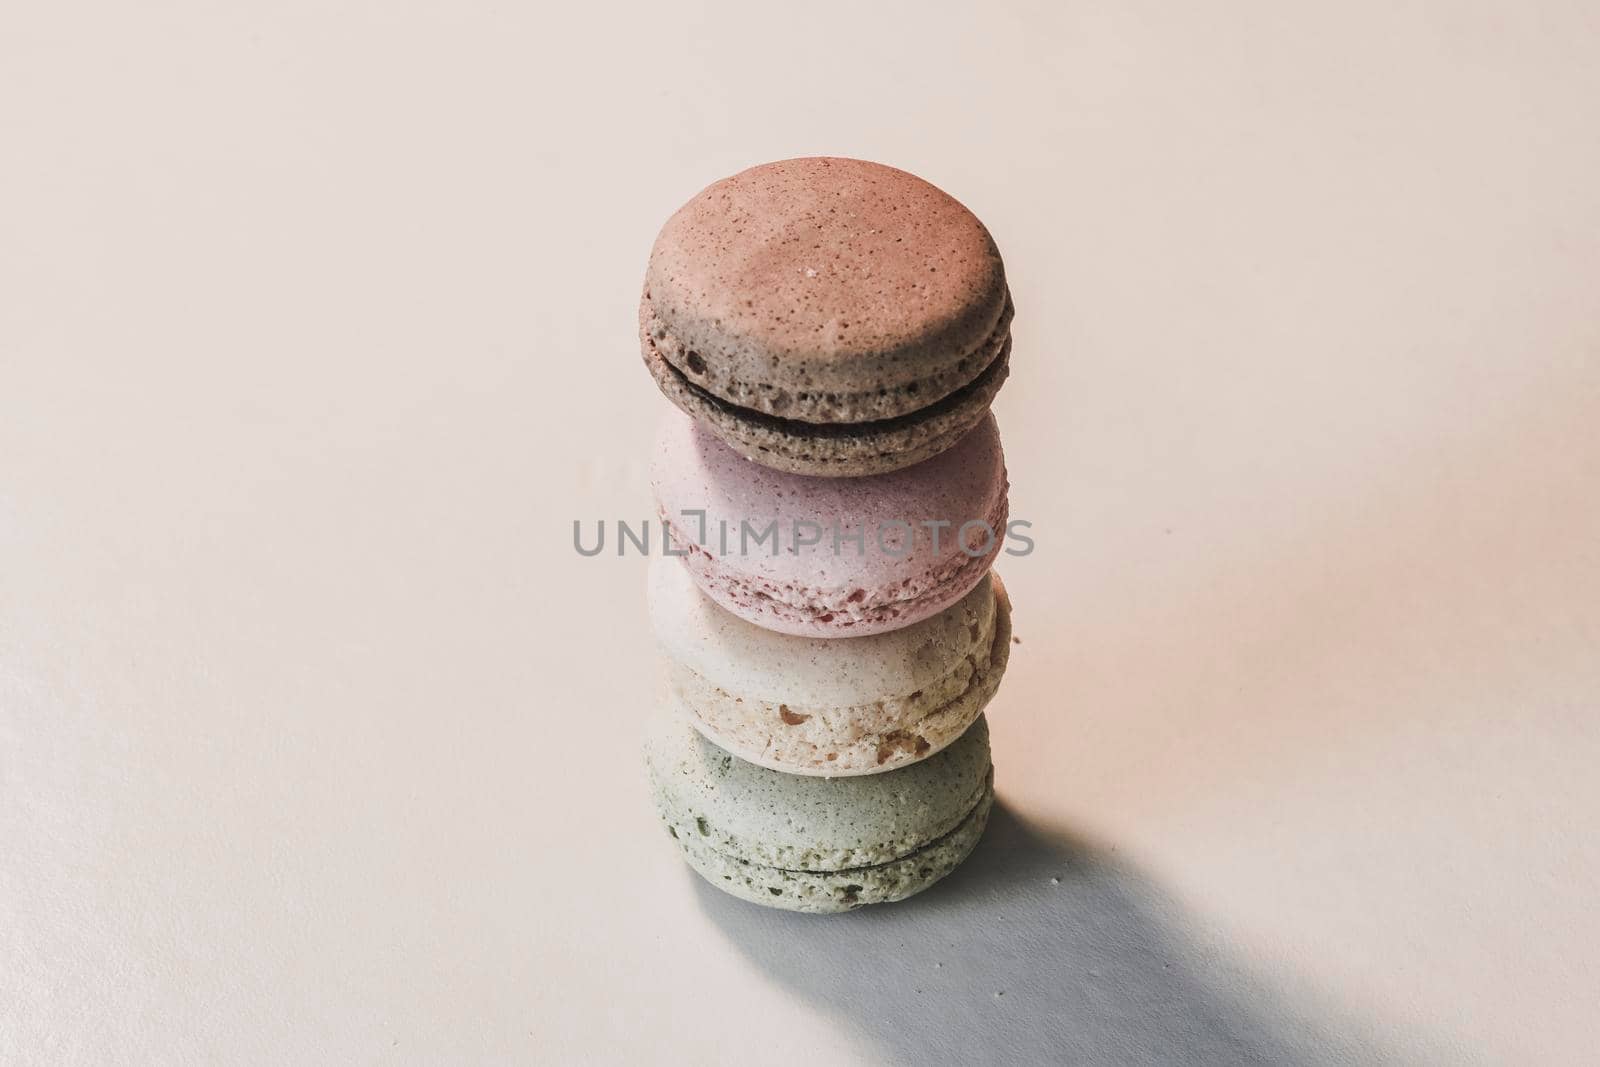 Macarons in different colours on a background 